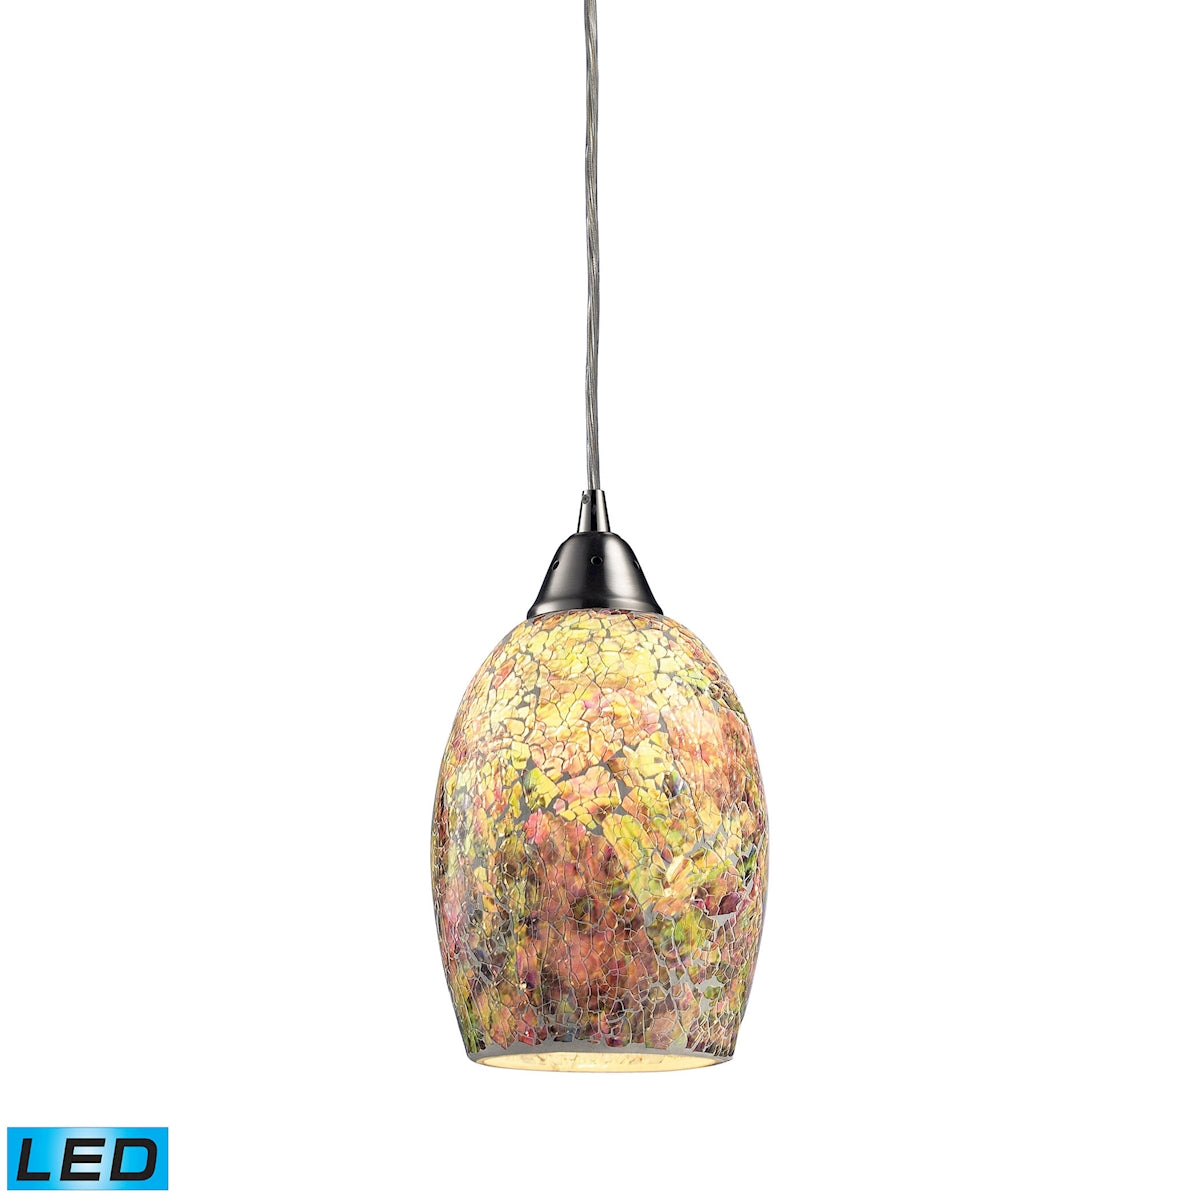 ELK Lighting 73021-1-LED Avalon 1-Light Mini Pendant in Satin Nickel with Multi-colored Crackle Glass - Includes LED Bulb